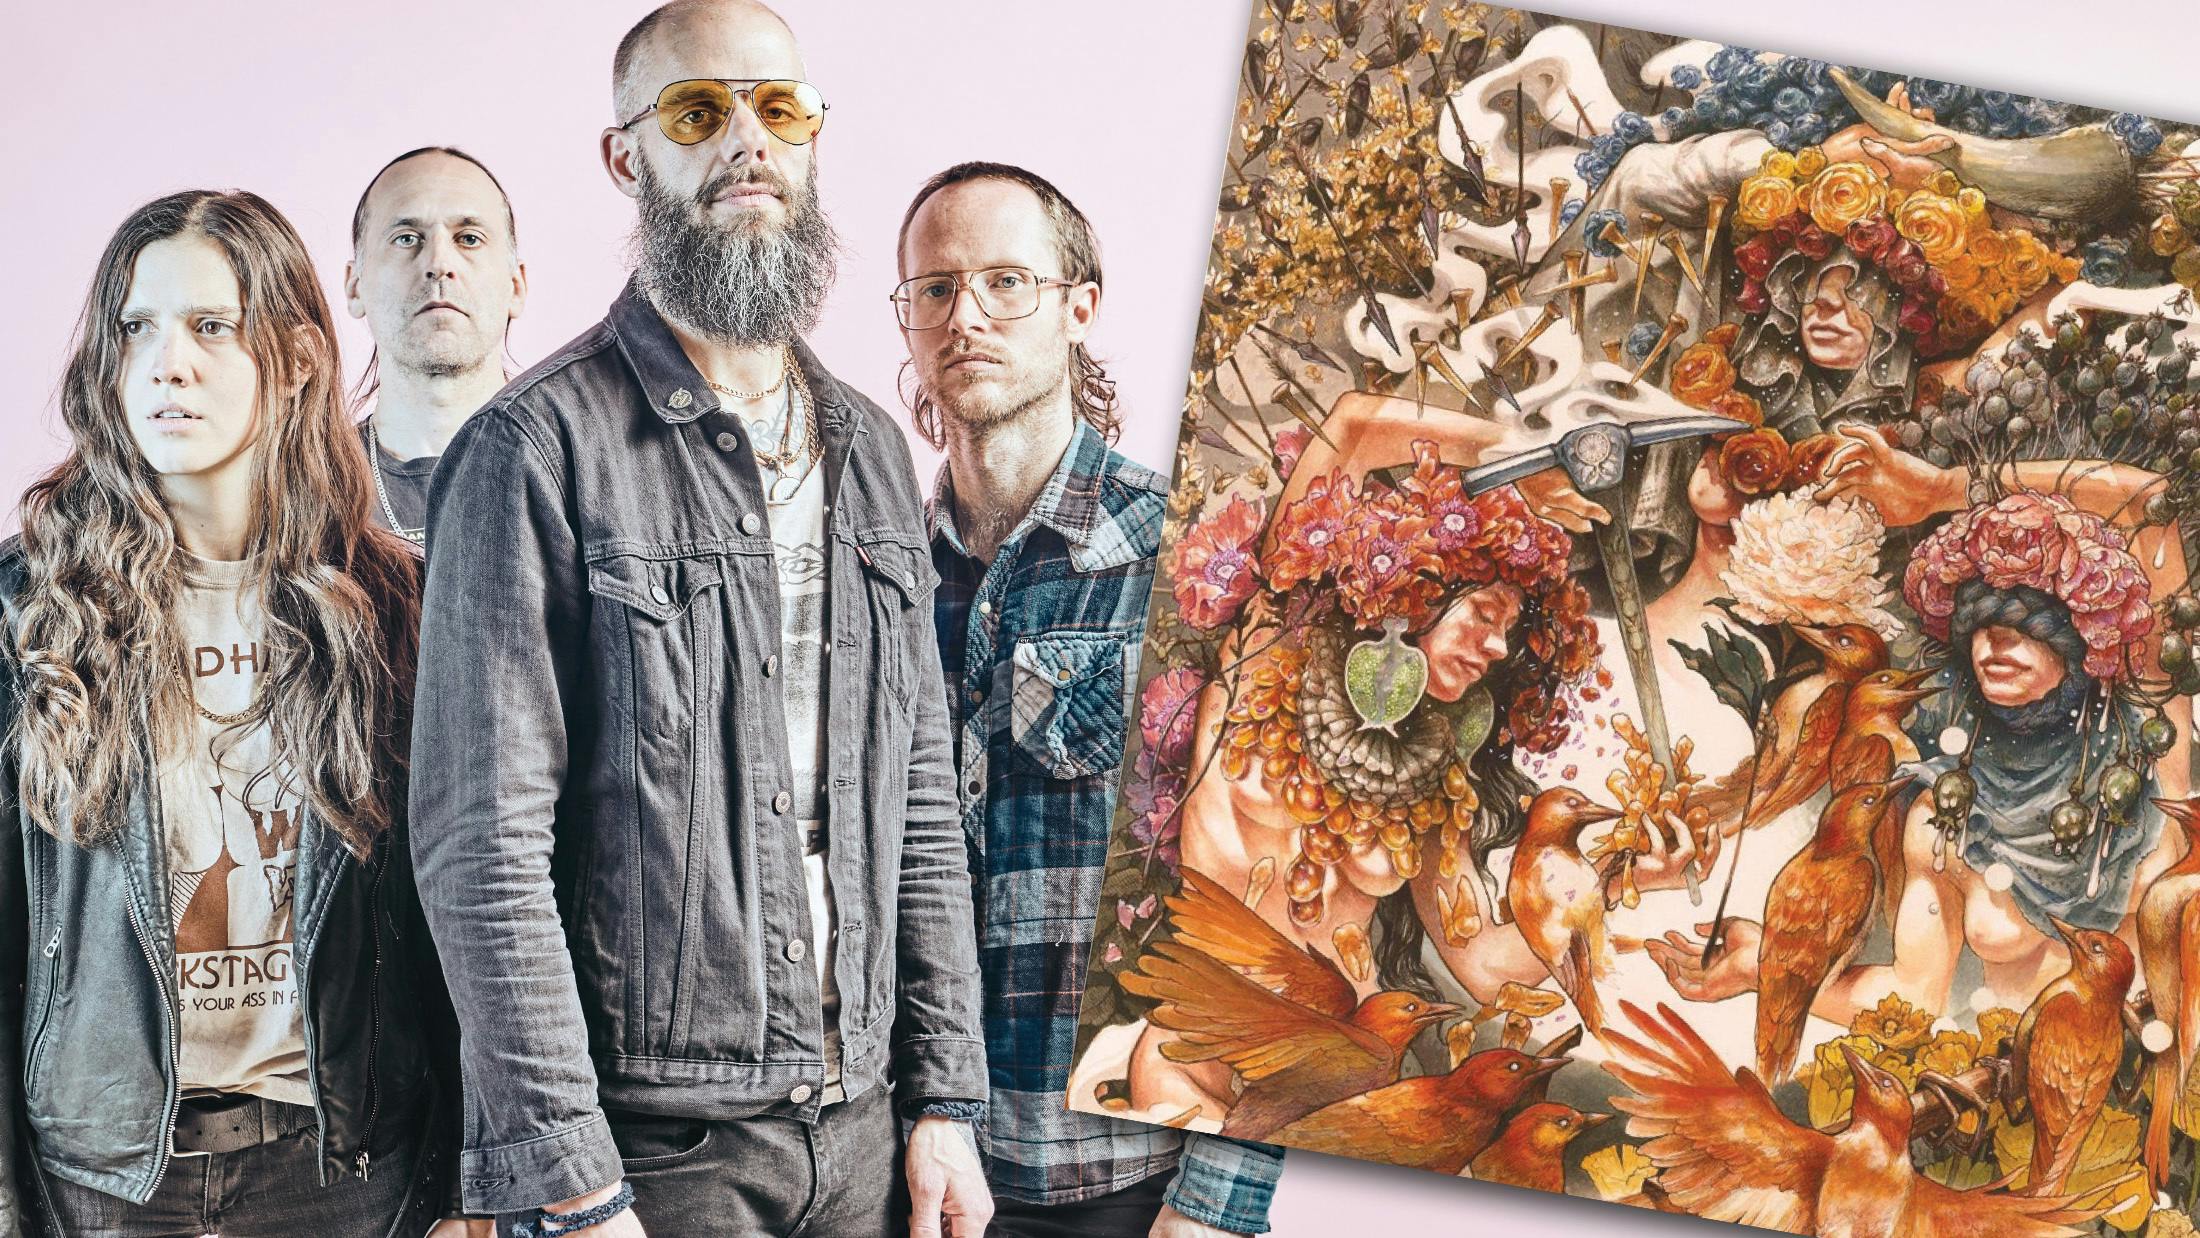 How Baroness' Gold & Grey Took Rock Music In New Directions In 2019